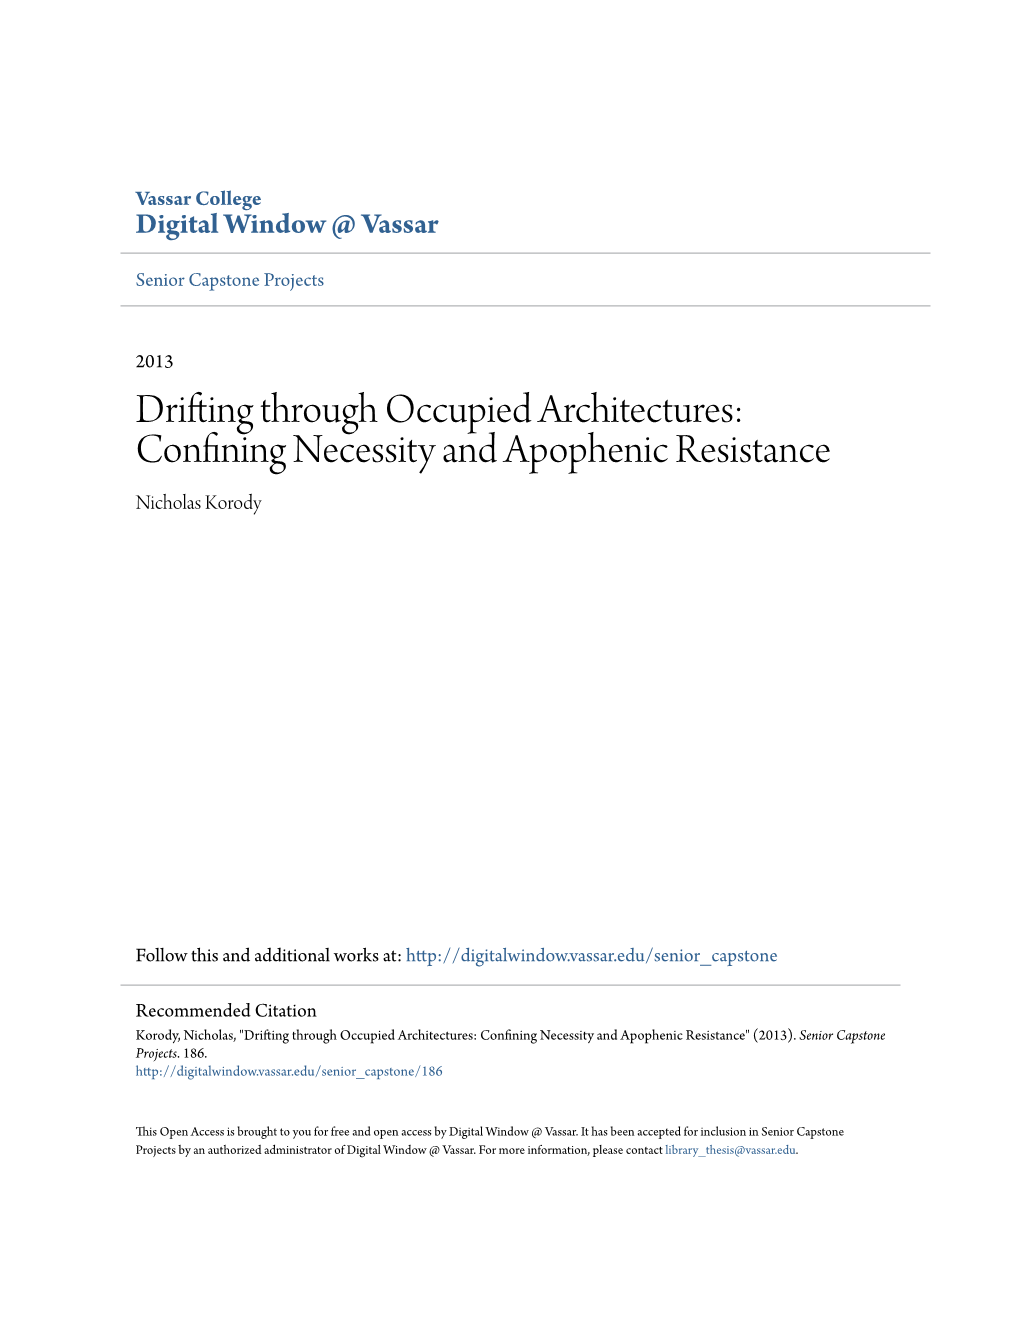 Drifting Through Occupied Architectures: Confining Necessity and Apophenic Resistance Nicholas Korody